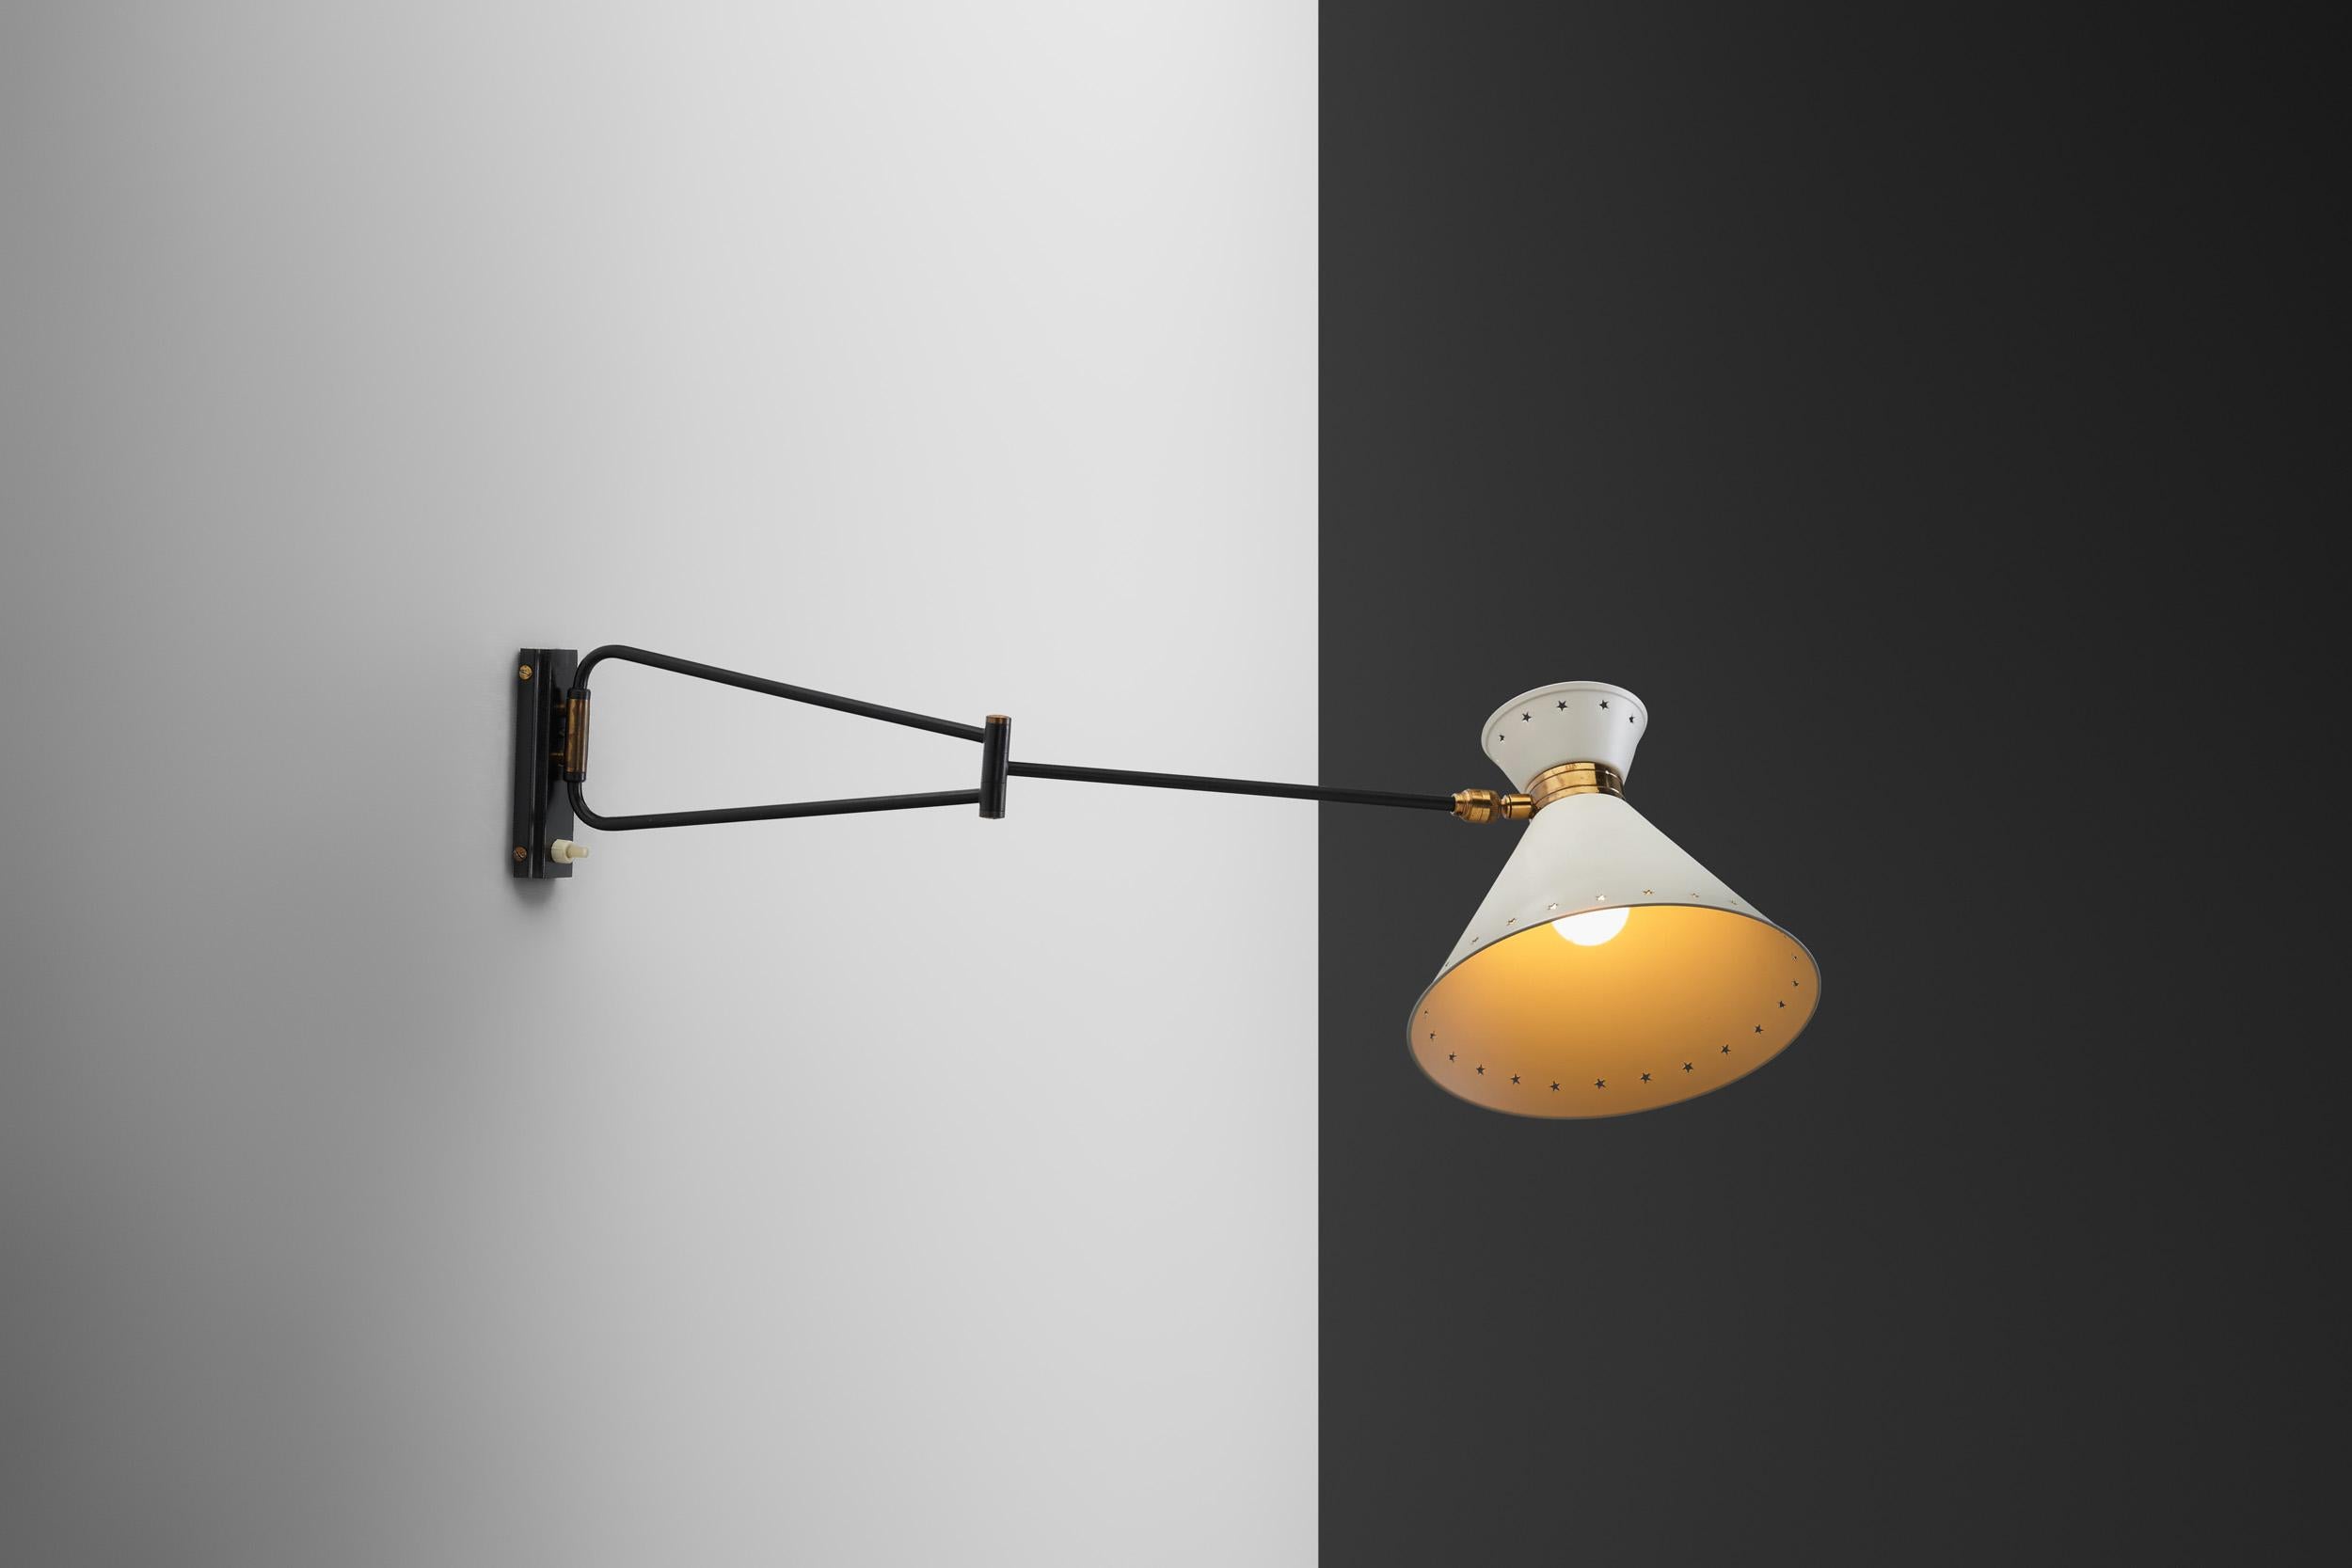 The swing arm “Diabolo” Wall Light was designed by René Mathieu for Lunel, and is a shining example of timeless elegance and innovative design. René Mathieu, was a prominent figure in mid-20th century French design, and was known for his ability to